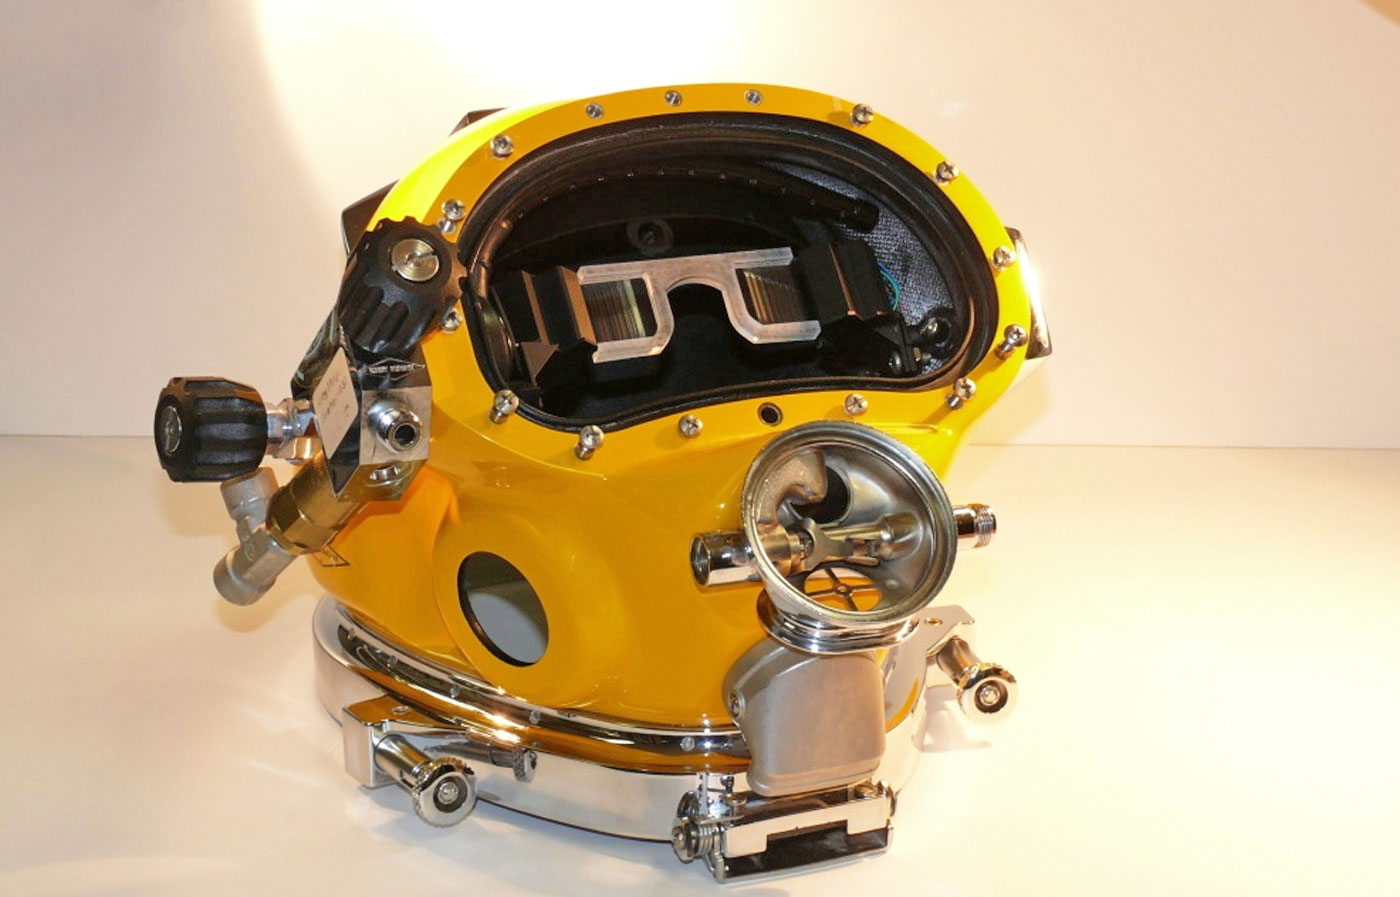 The US Navy just put a futuristic HUD in a diving helmet